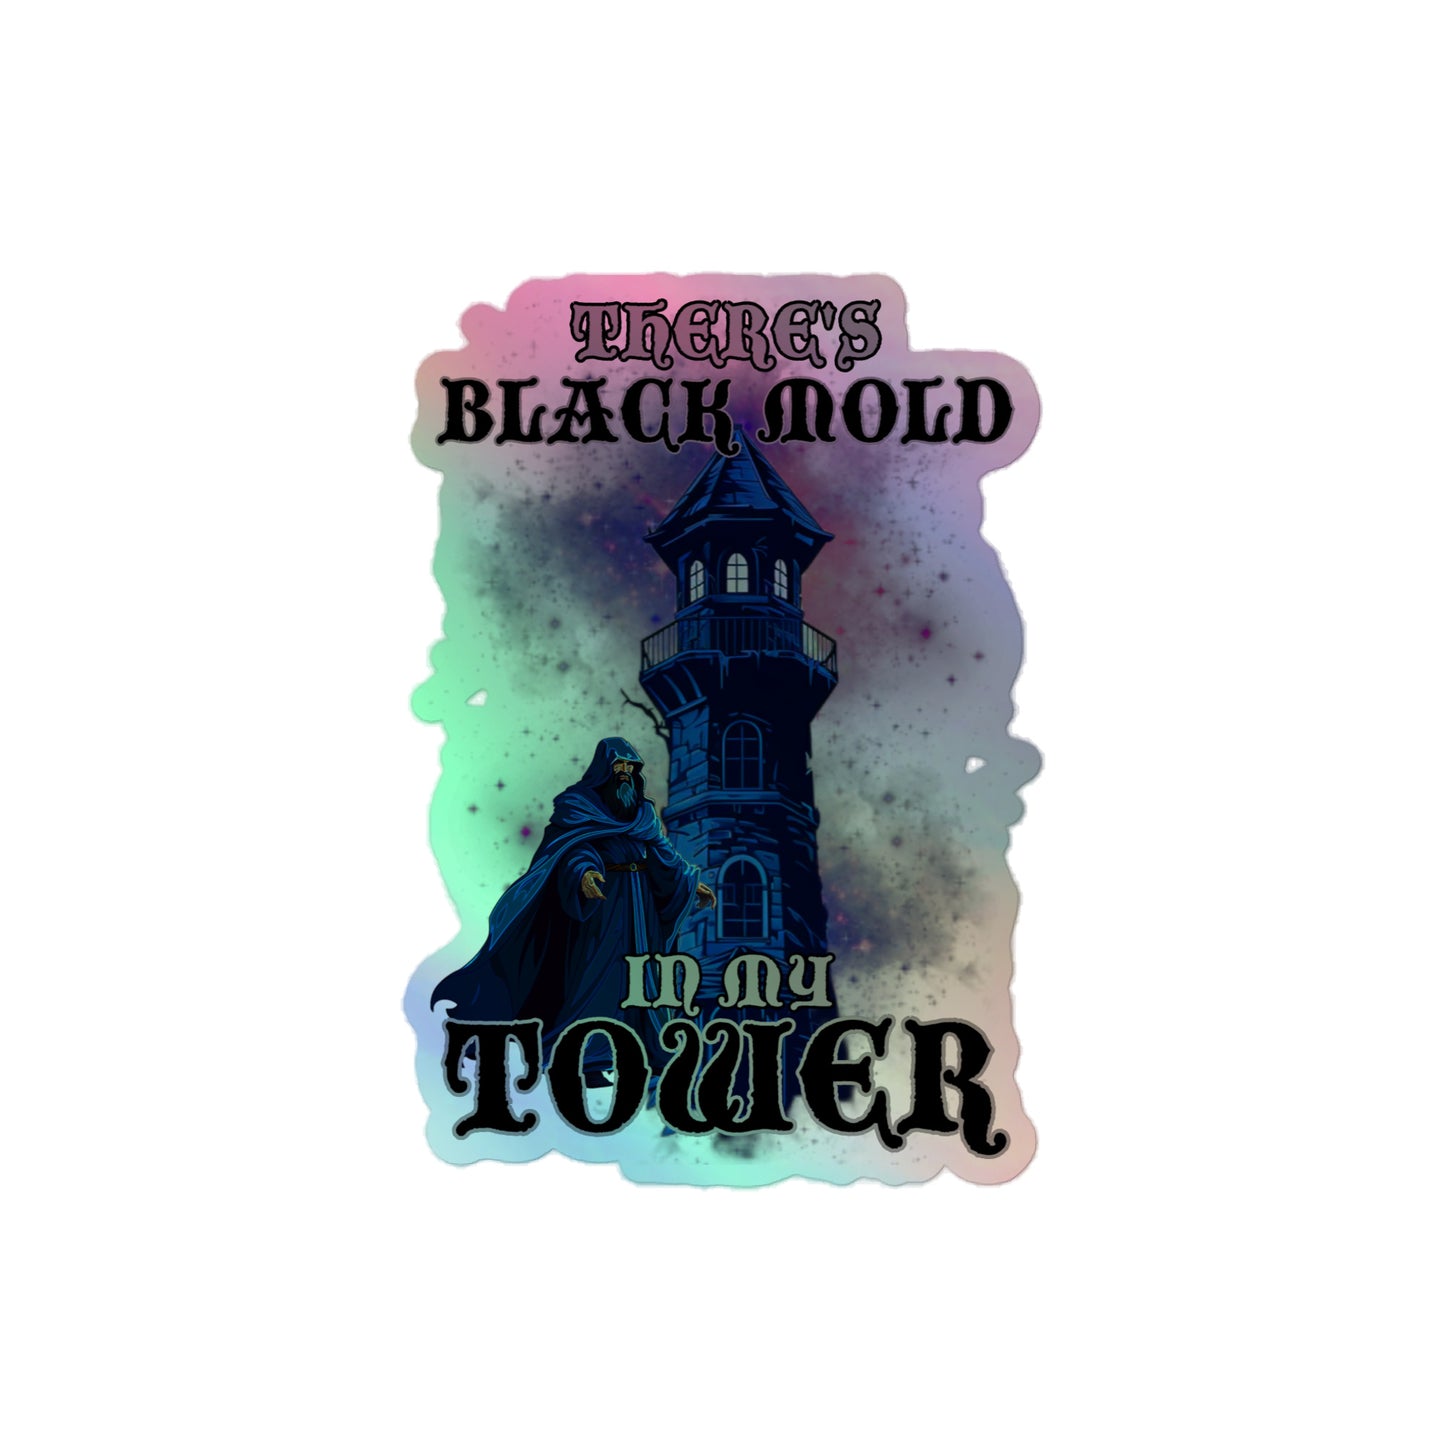 There's black mold in my tower (sticker)